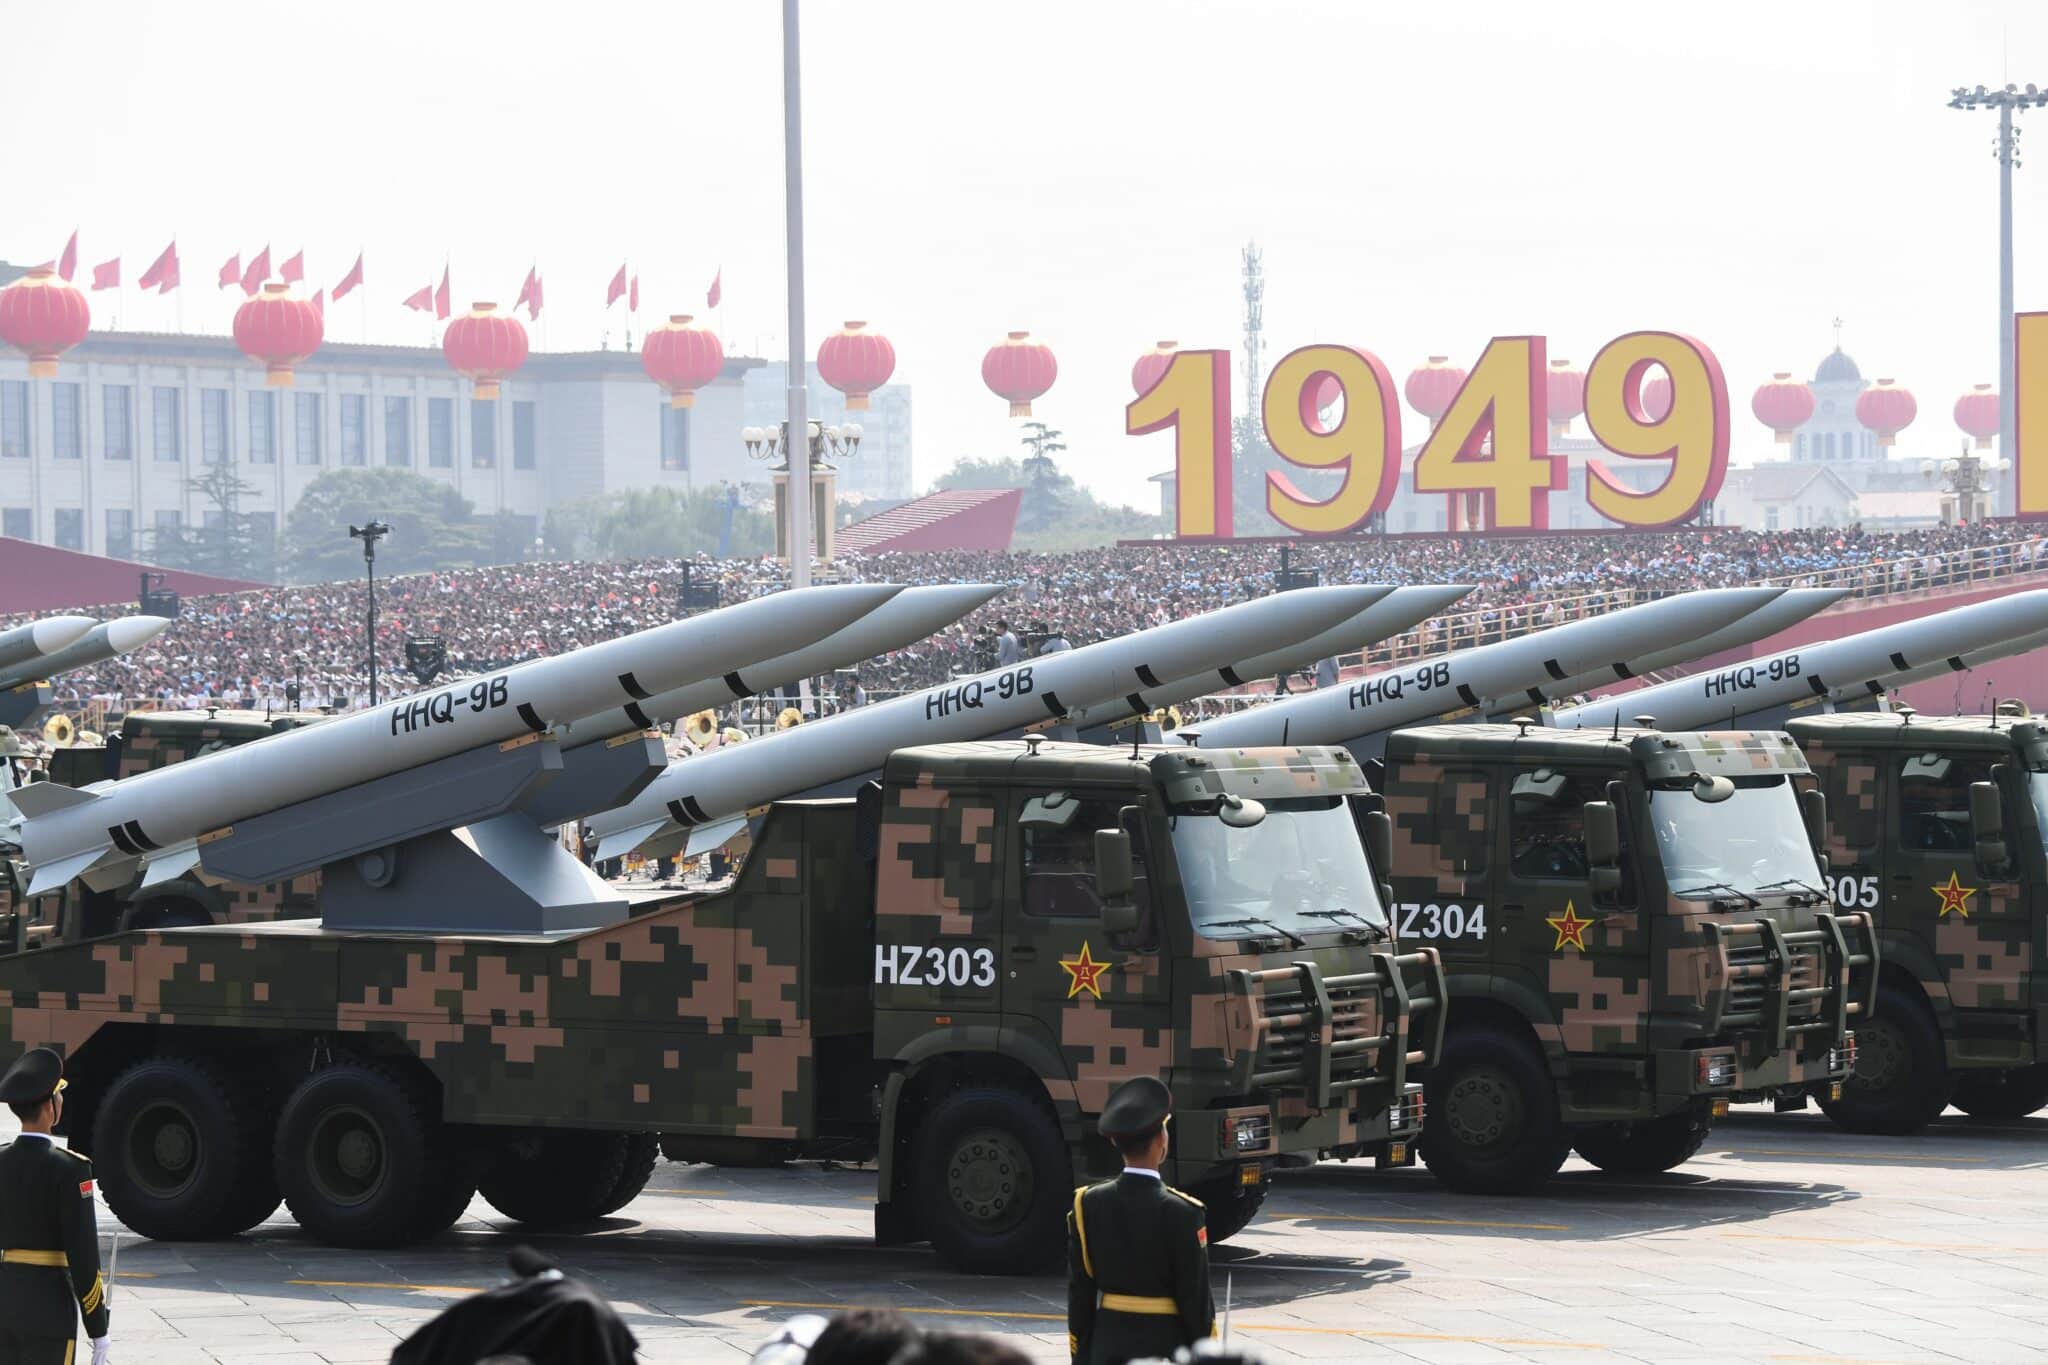 Military vehicles carrying HHQ-9B surface-to-air missiles participate in a military parade at Tiananmen Square in Beijing on October 1, 2019, to mark the 70th anniversary of the founding of the Peoples Republic of China. (Photo by GREG BAKER / AFP)        (Photo credit should read GREG BAKER/AFP via Getty Images)